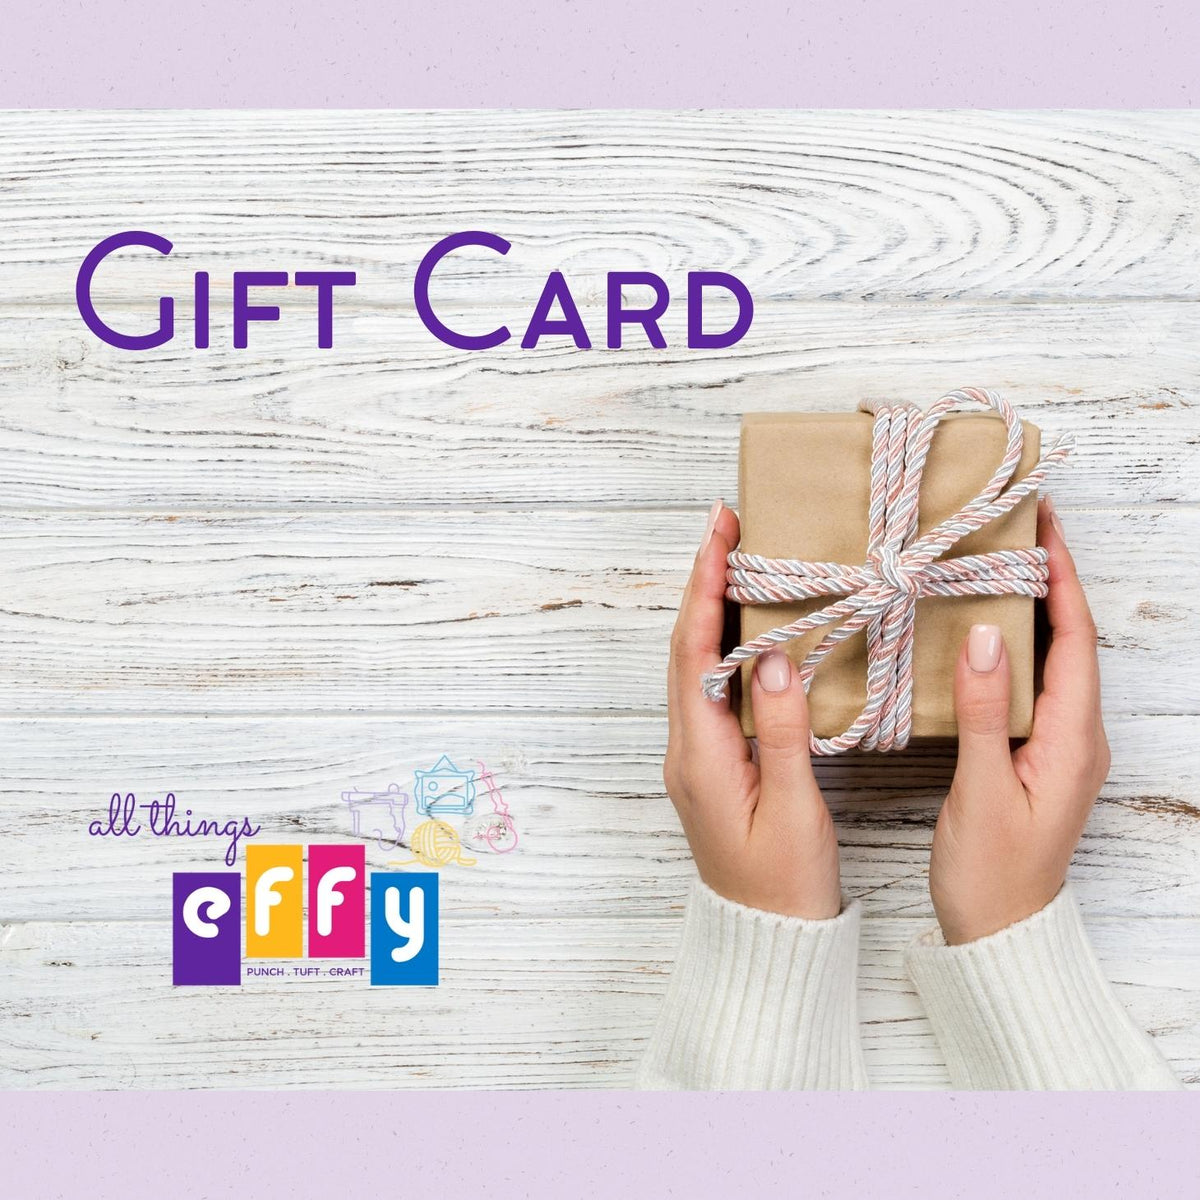 All Things EFFY Gift card